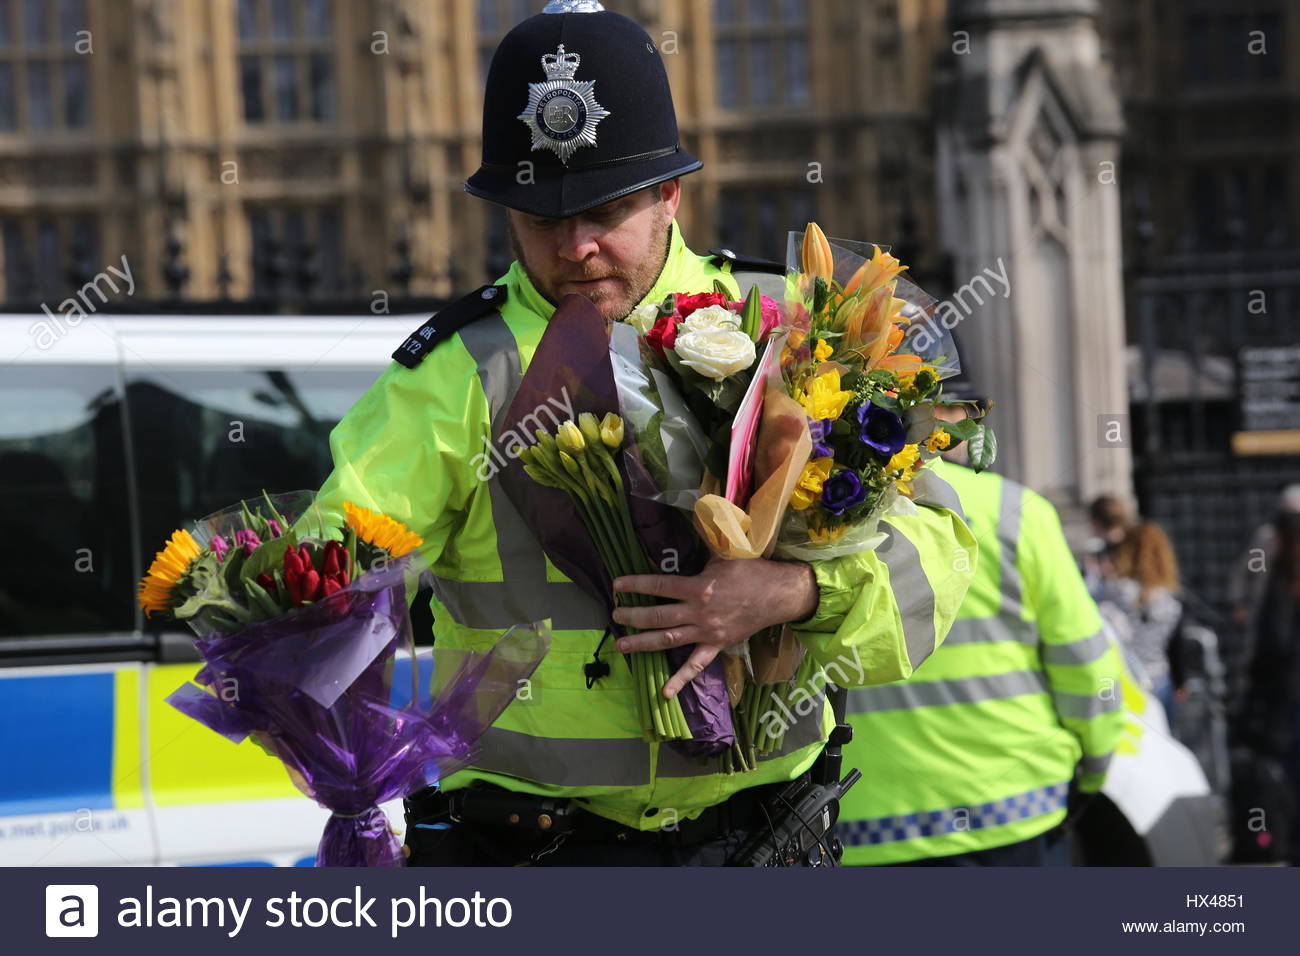 Westminster, London, UK. 24th March, 2017. A policeman carries flowers across the road at Westminster London this afternoon. Credit: reallifephotos/Alamy Live News Stock Photo